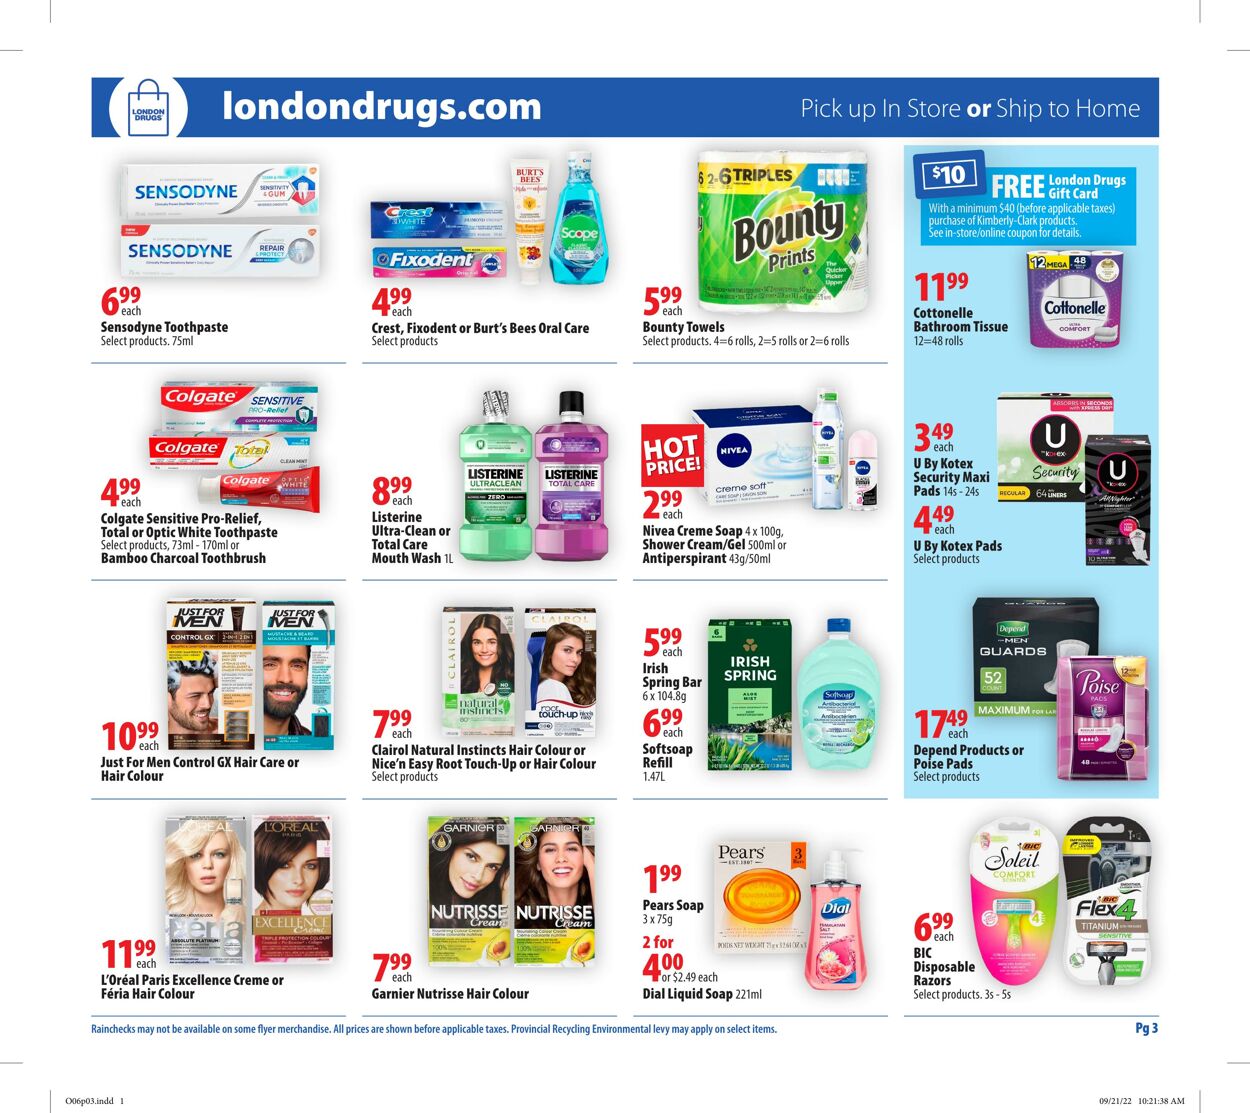 Circulaire London Drugs 06.10.2022 - 12.10.2022